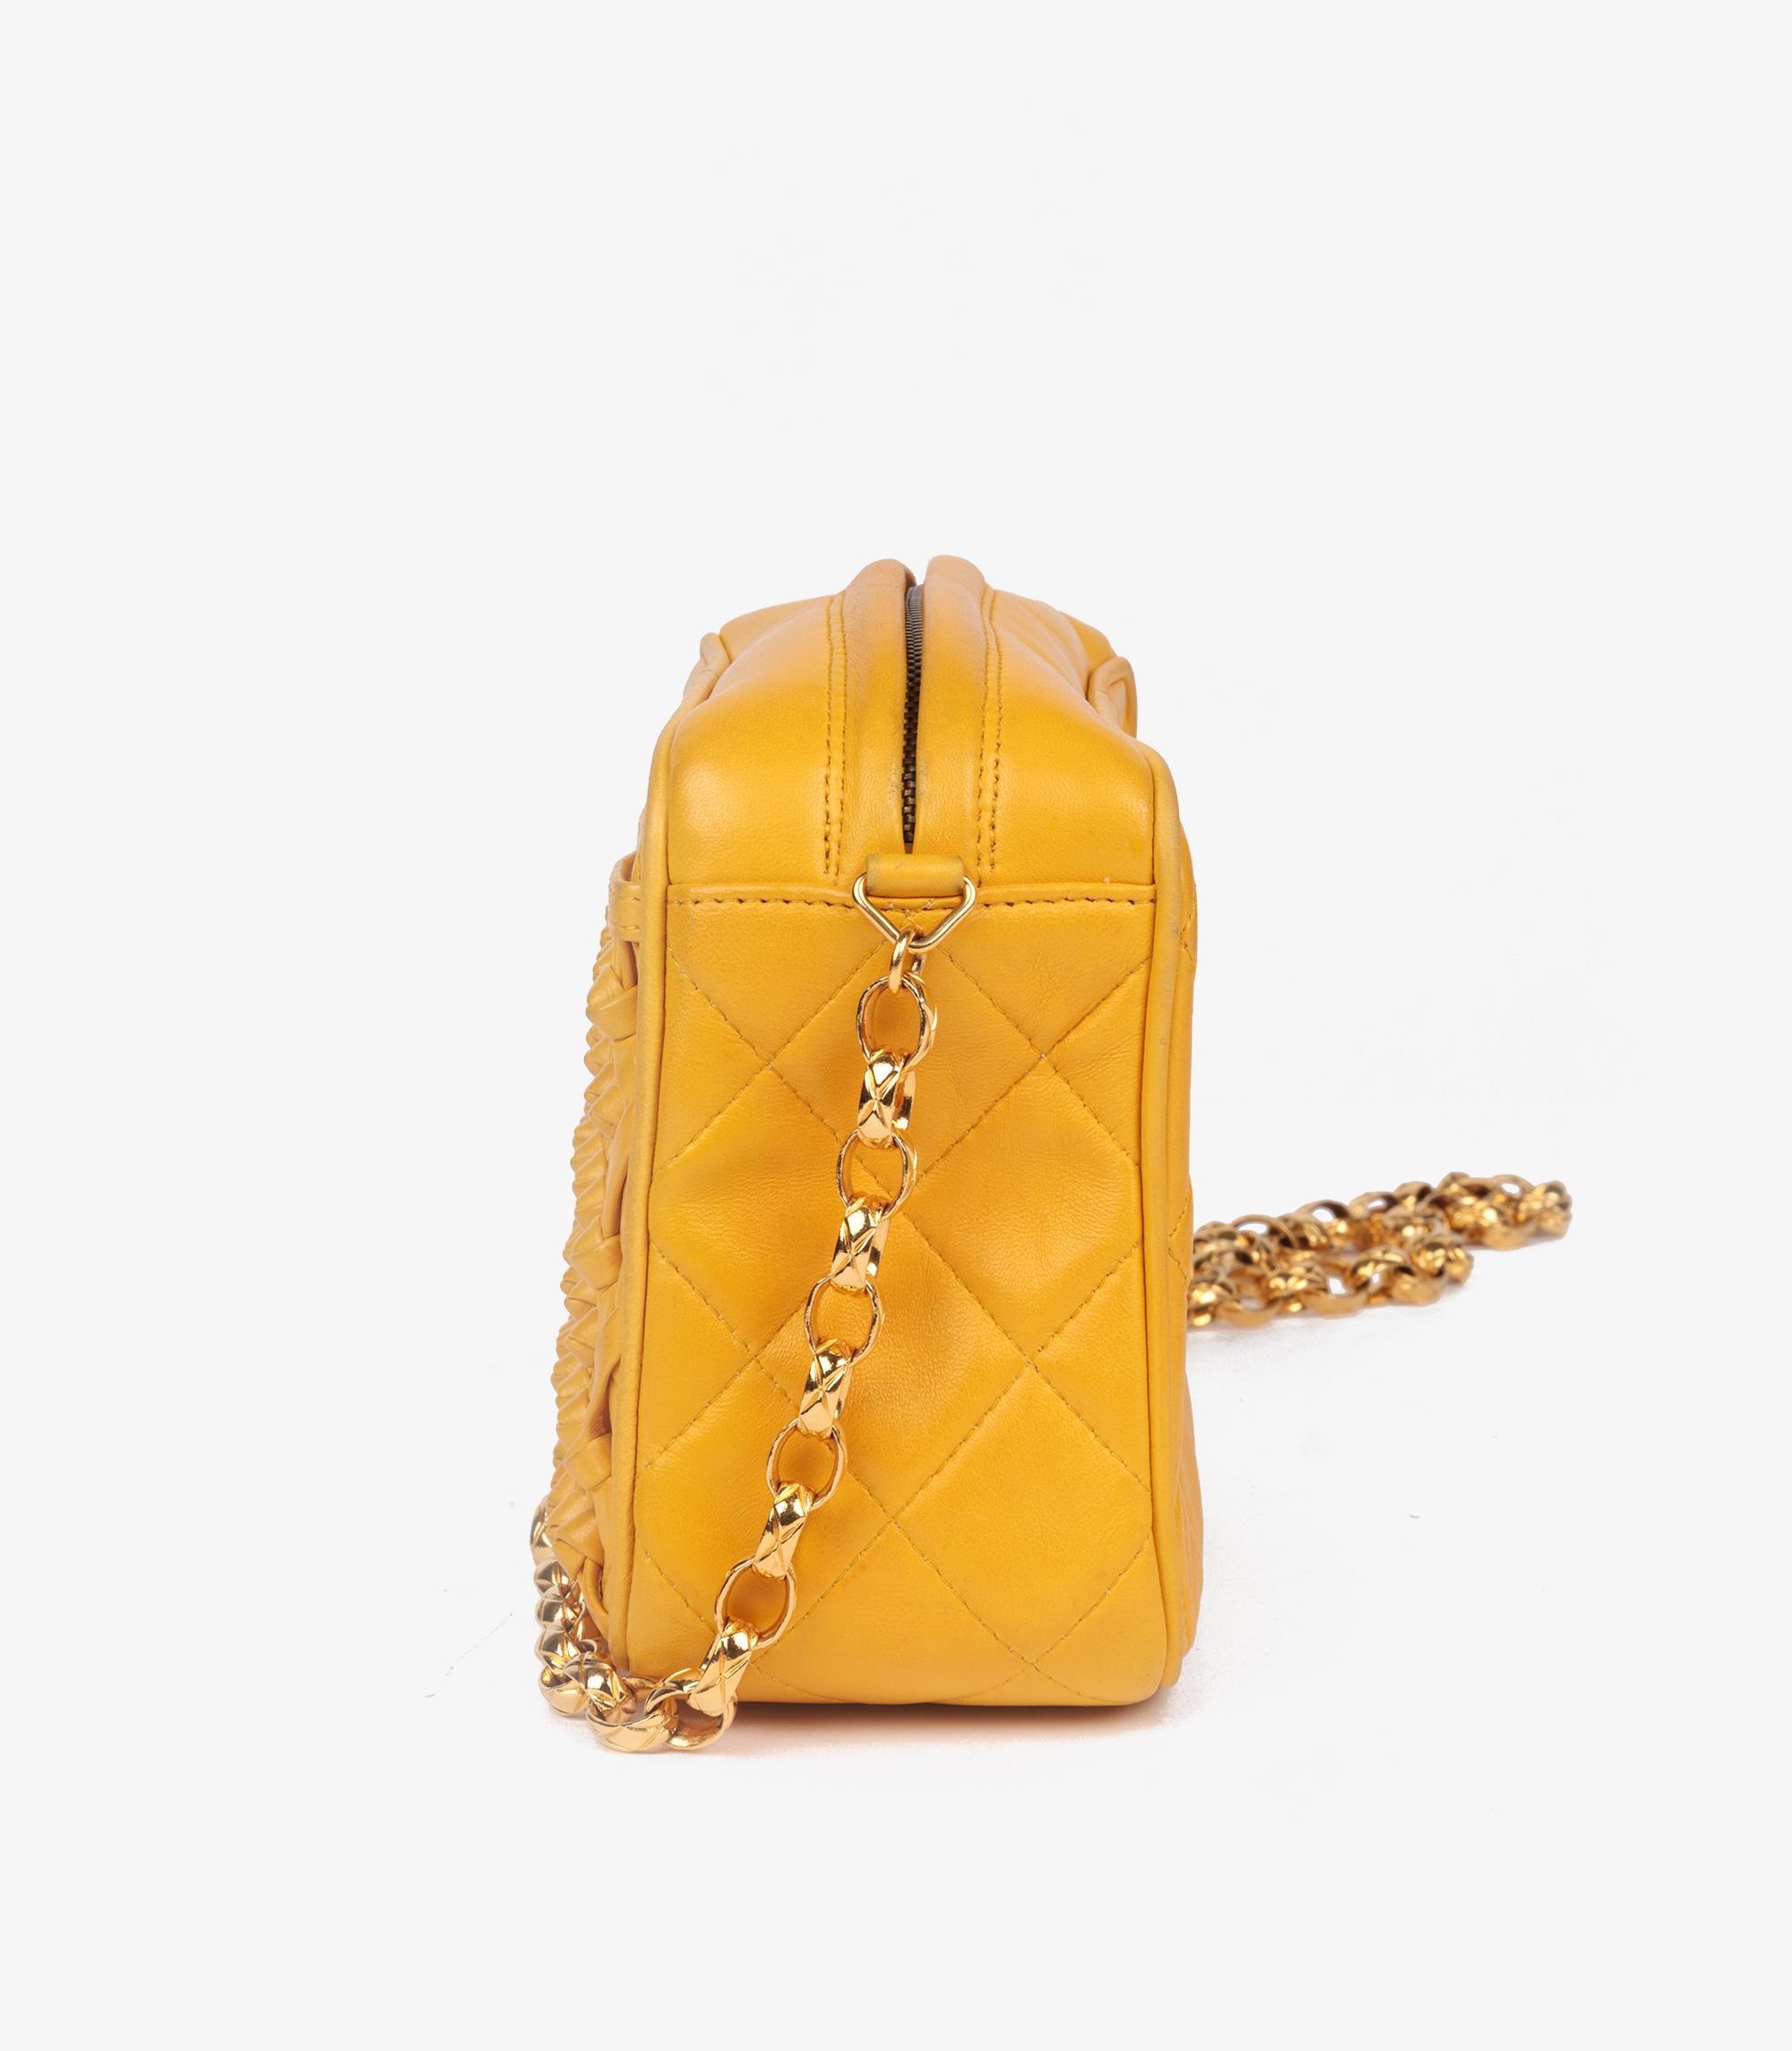 Chanel Yellow Quilted Lambskin Vintage Mini Camera Bag For Sale 3